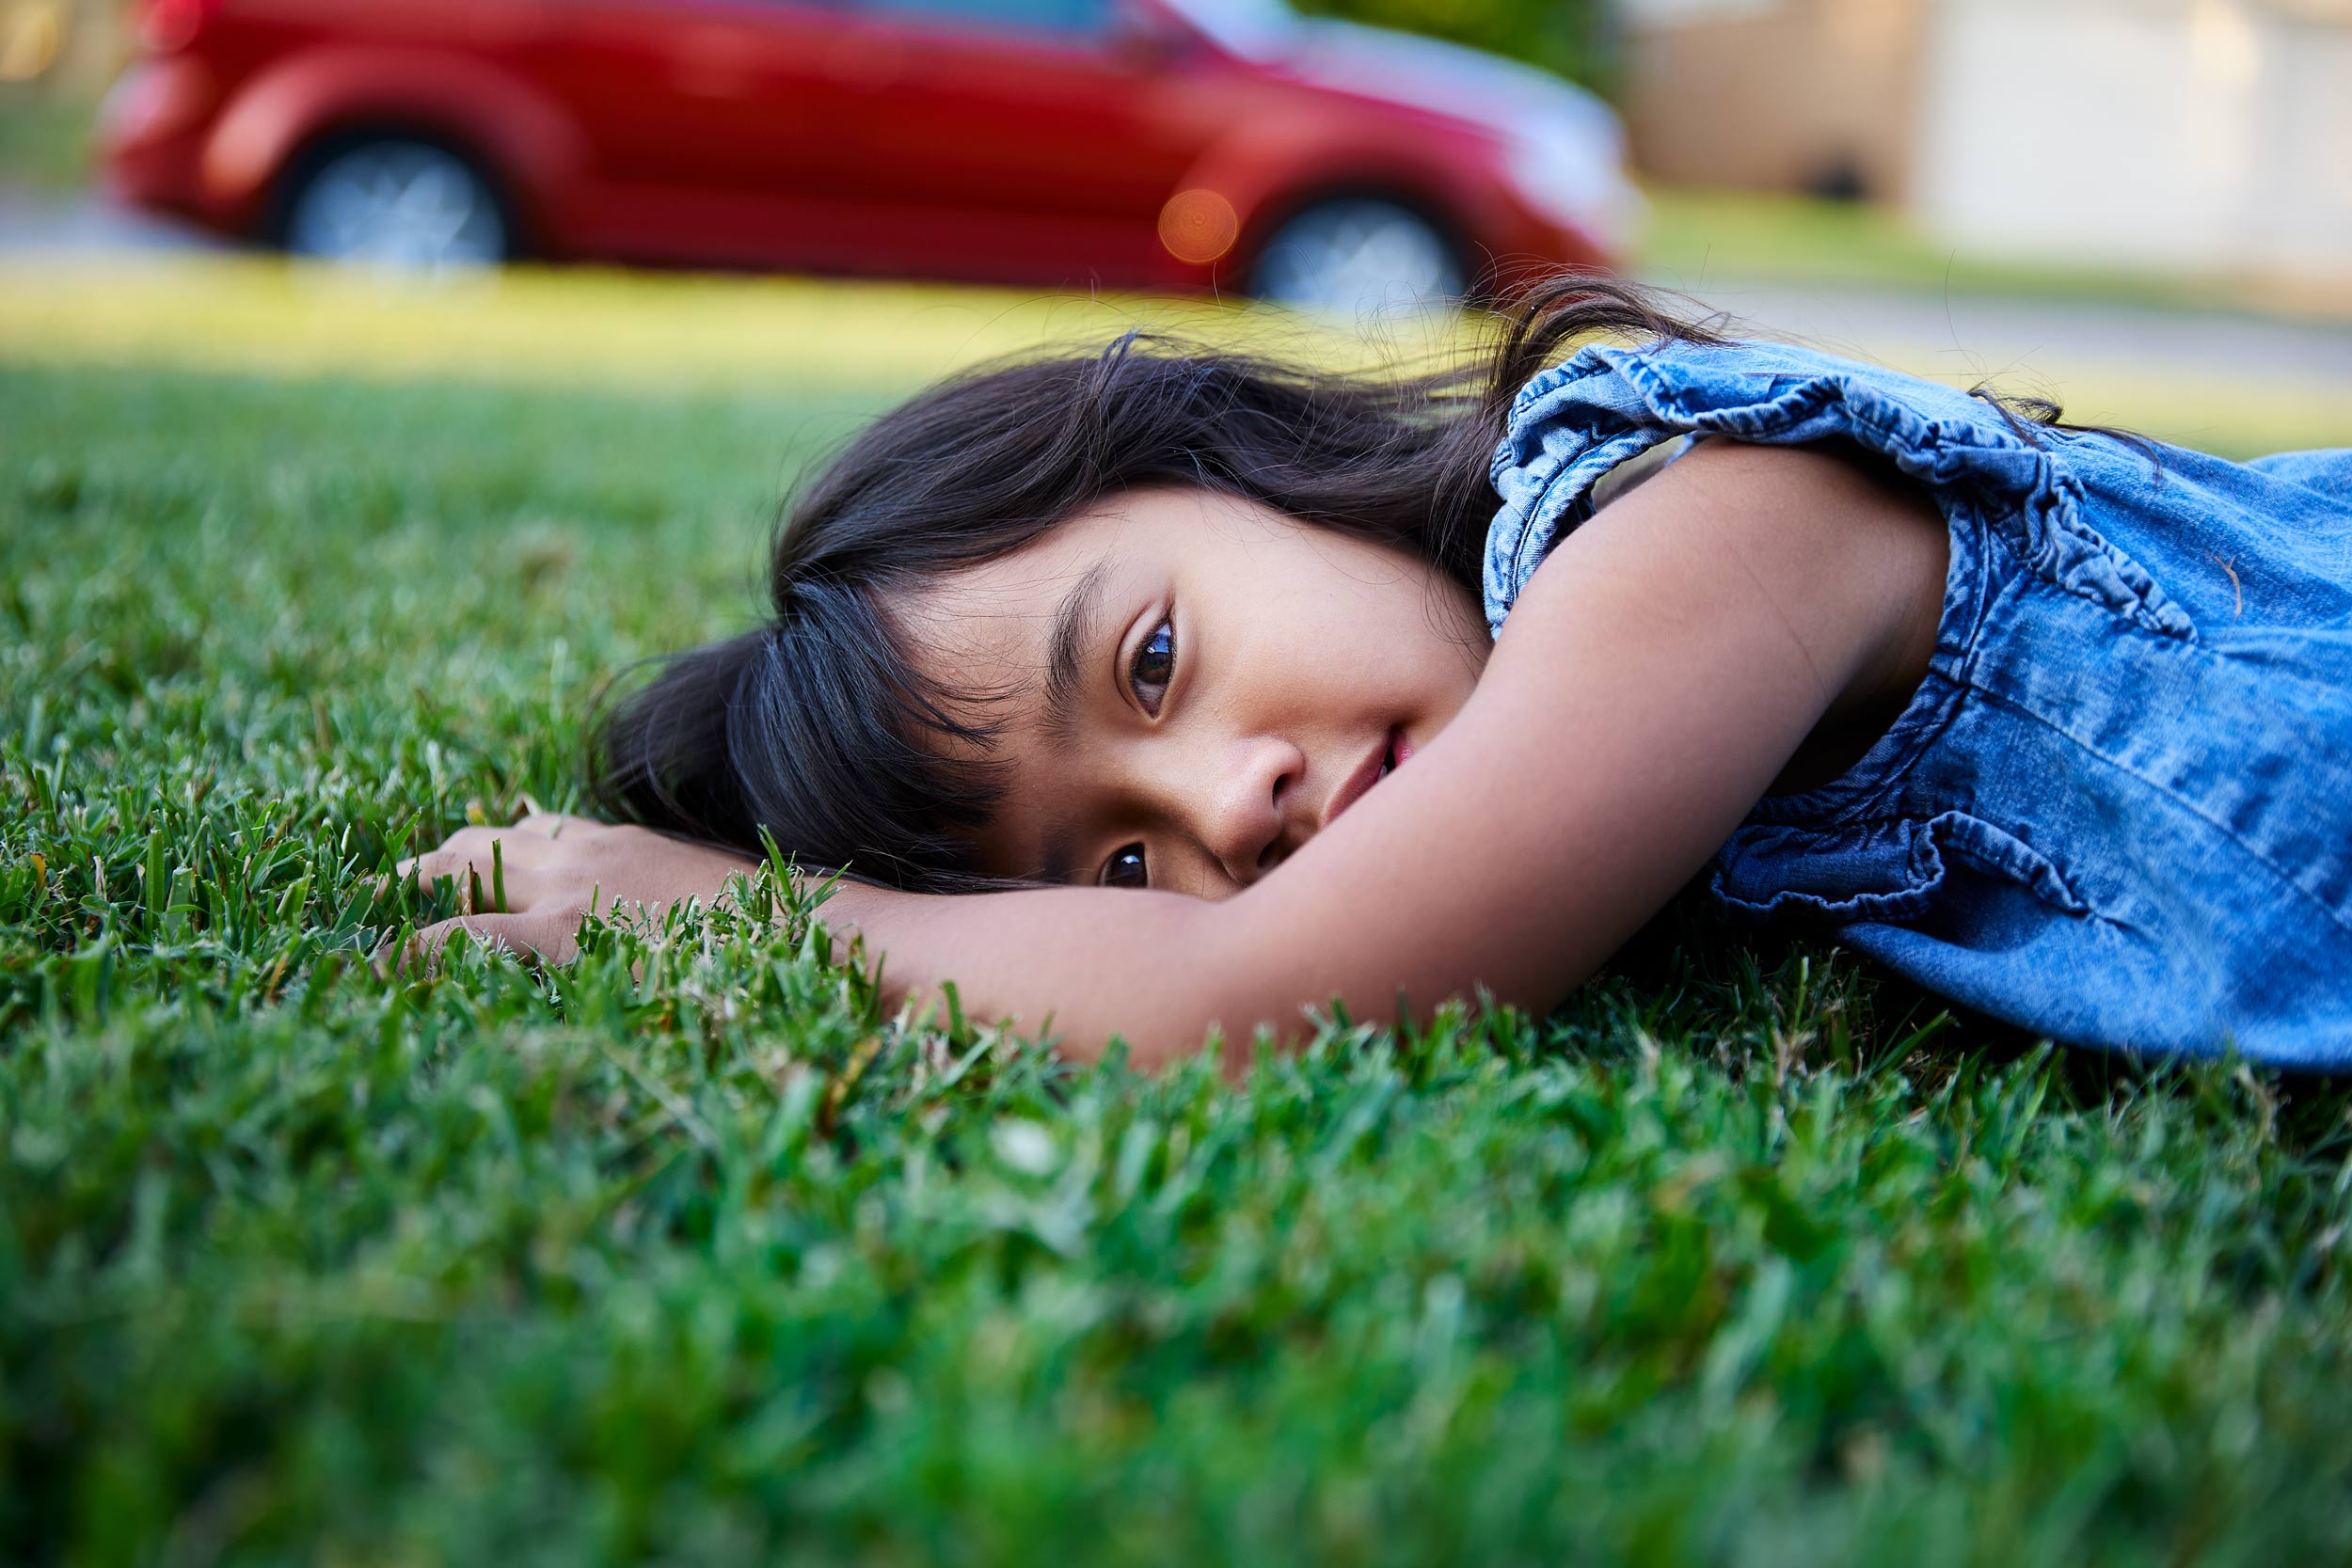 Outdoor lifestyle photograph of a young girl laying in the grass.